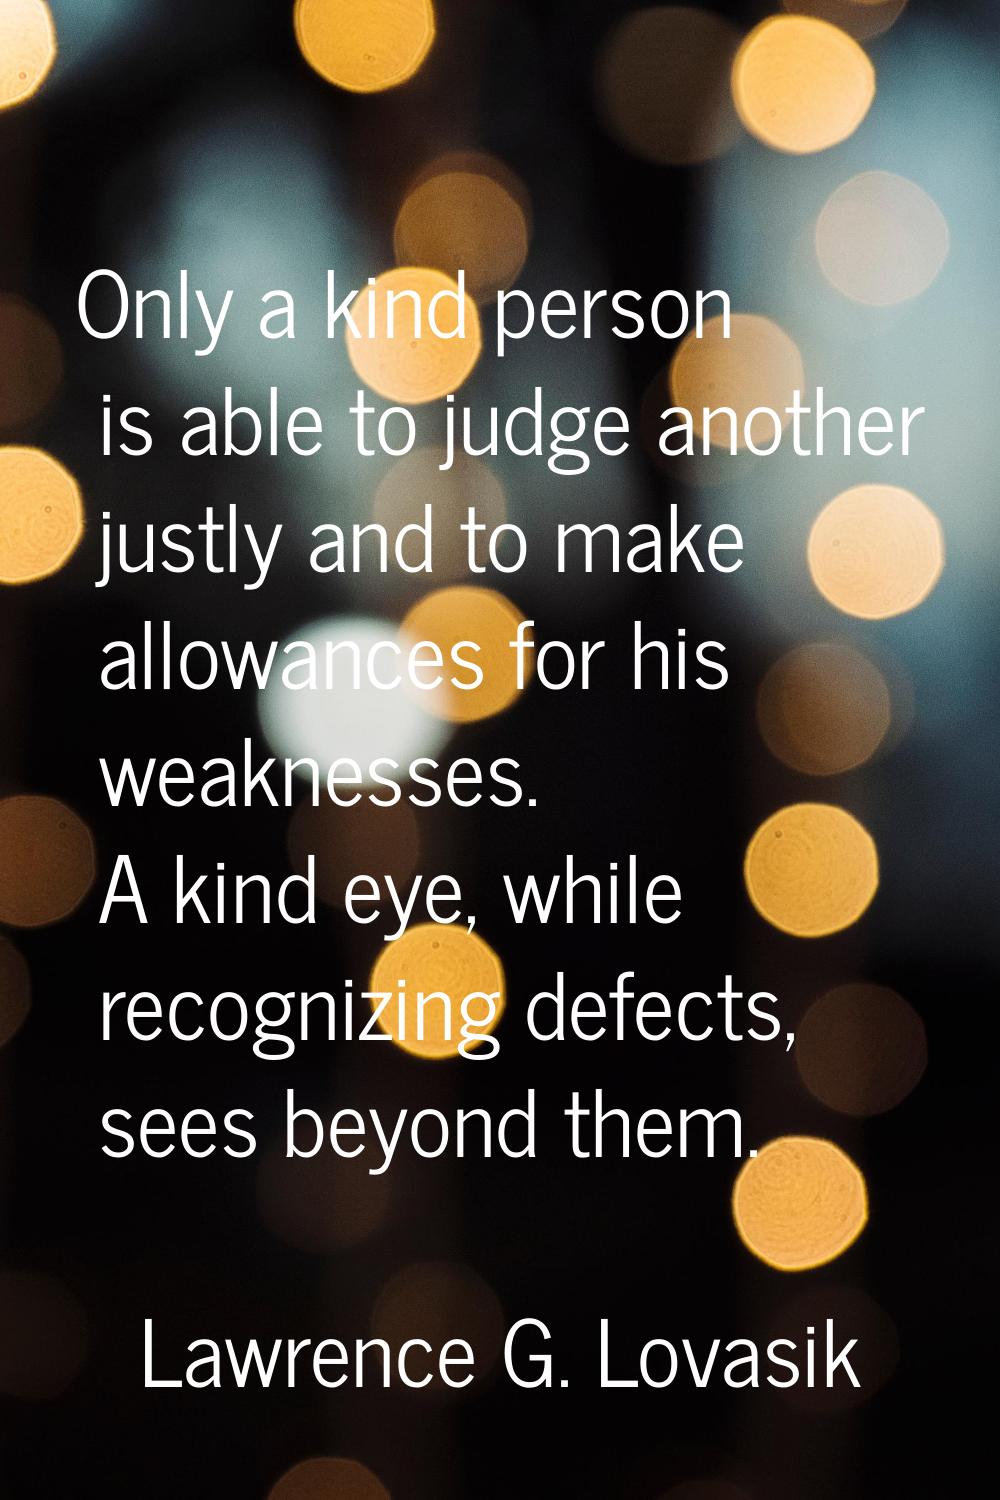 Only a kind person is able to judge another justly and to make allowances for his weaknesses. A kin